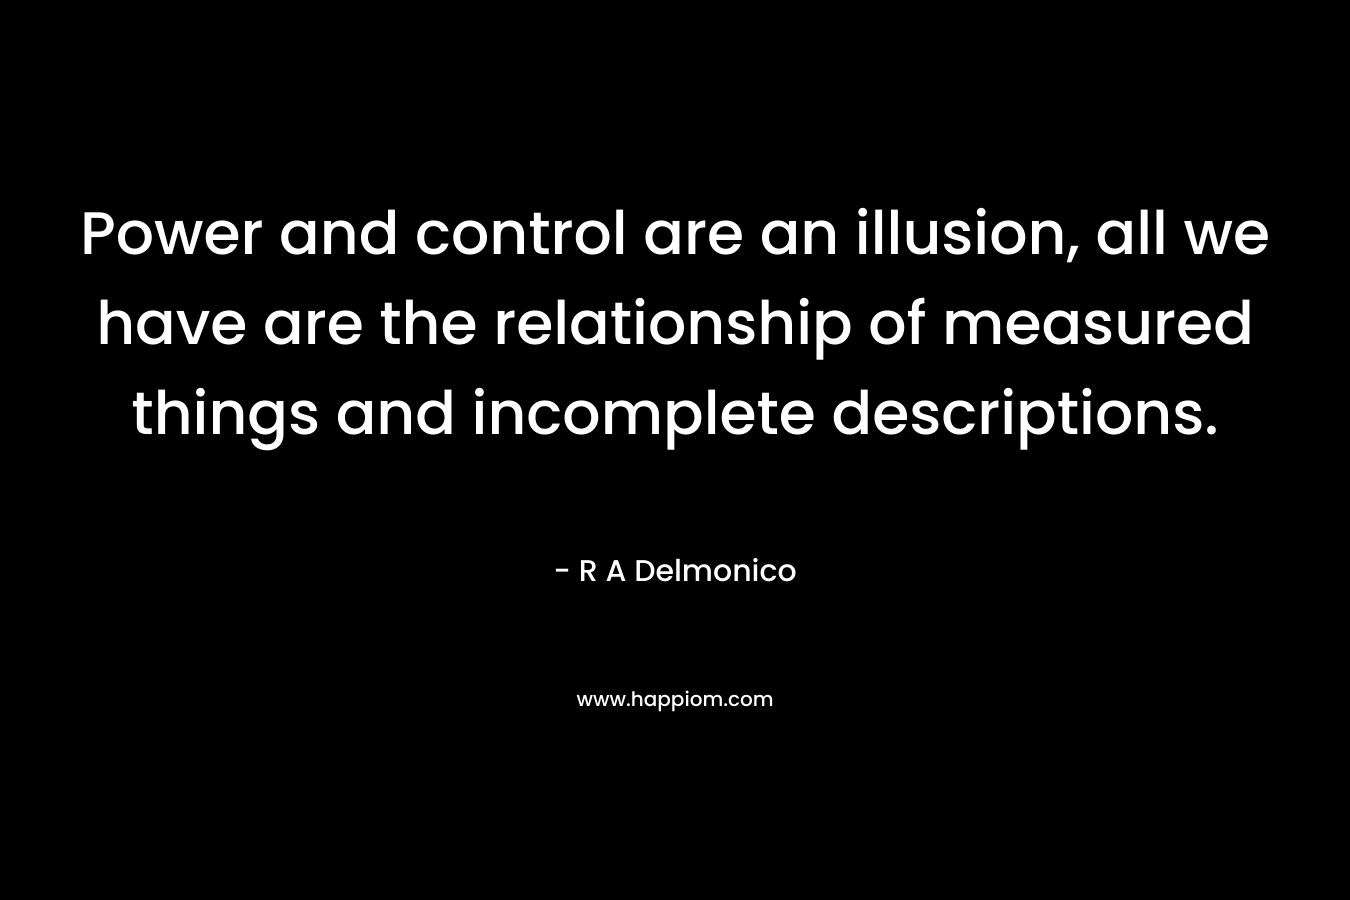 Power and control are an illusion, all we have are the relationship of measured things and incomplete descriptions.